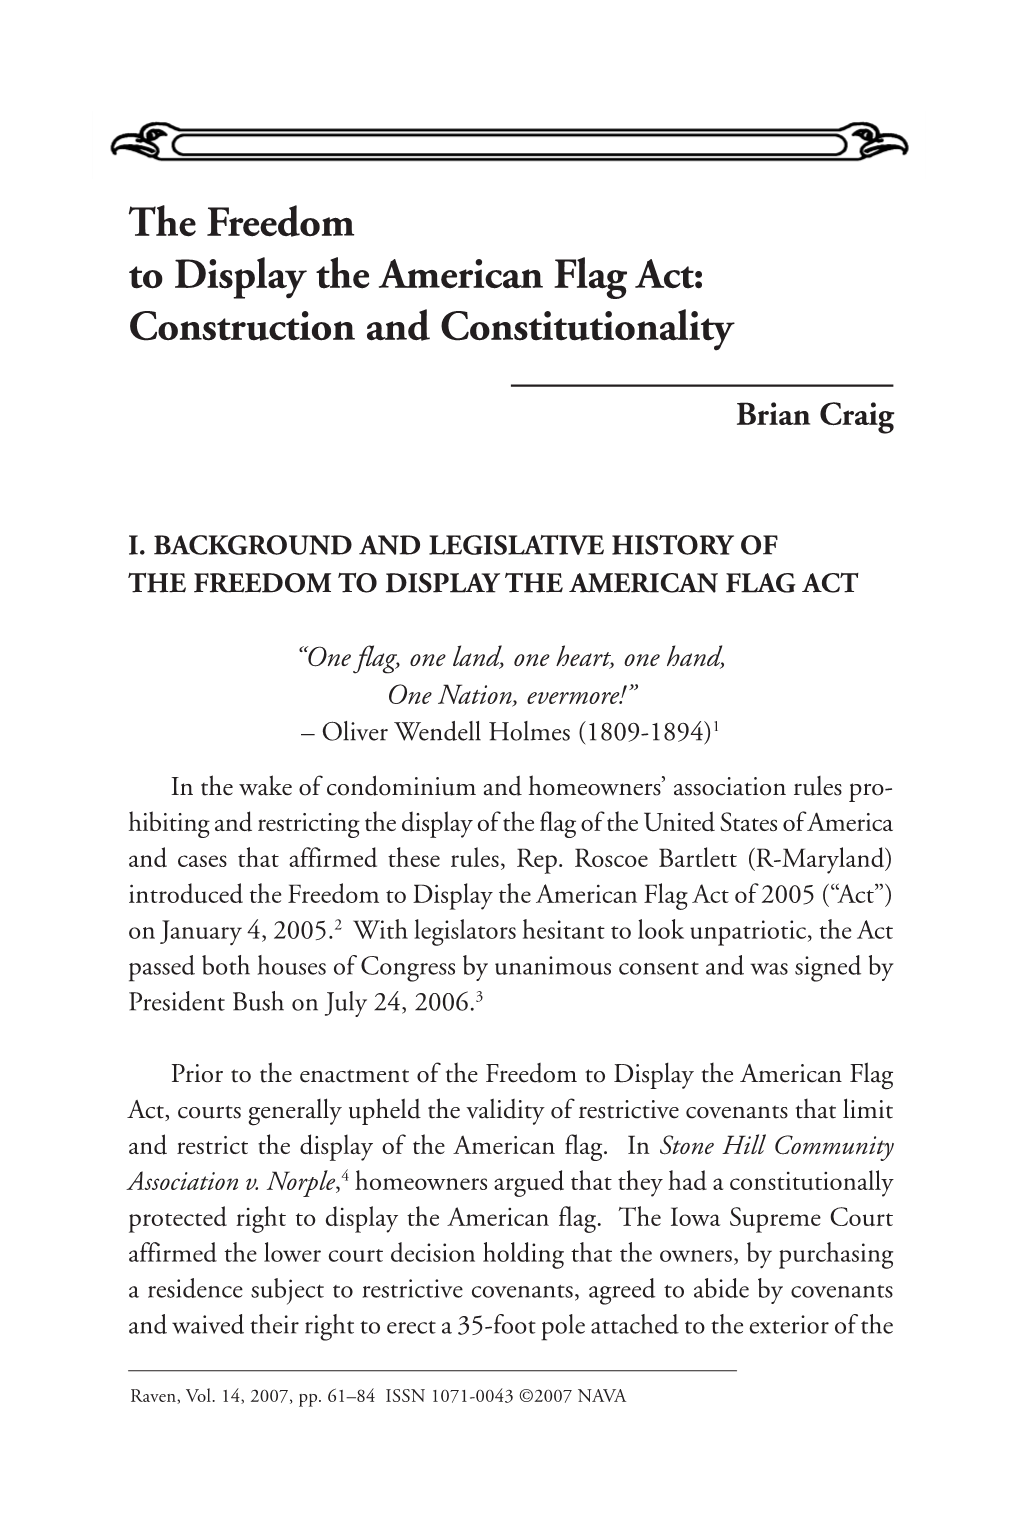 The Freedom to Display the American Flag Act 61